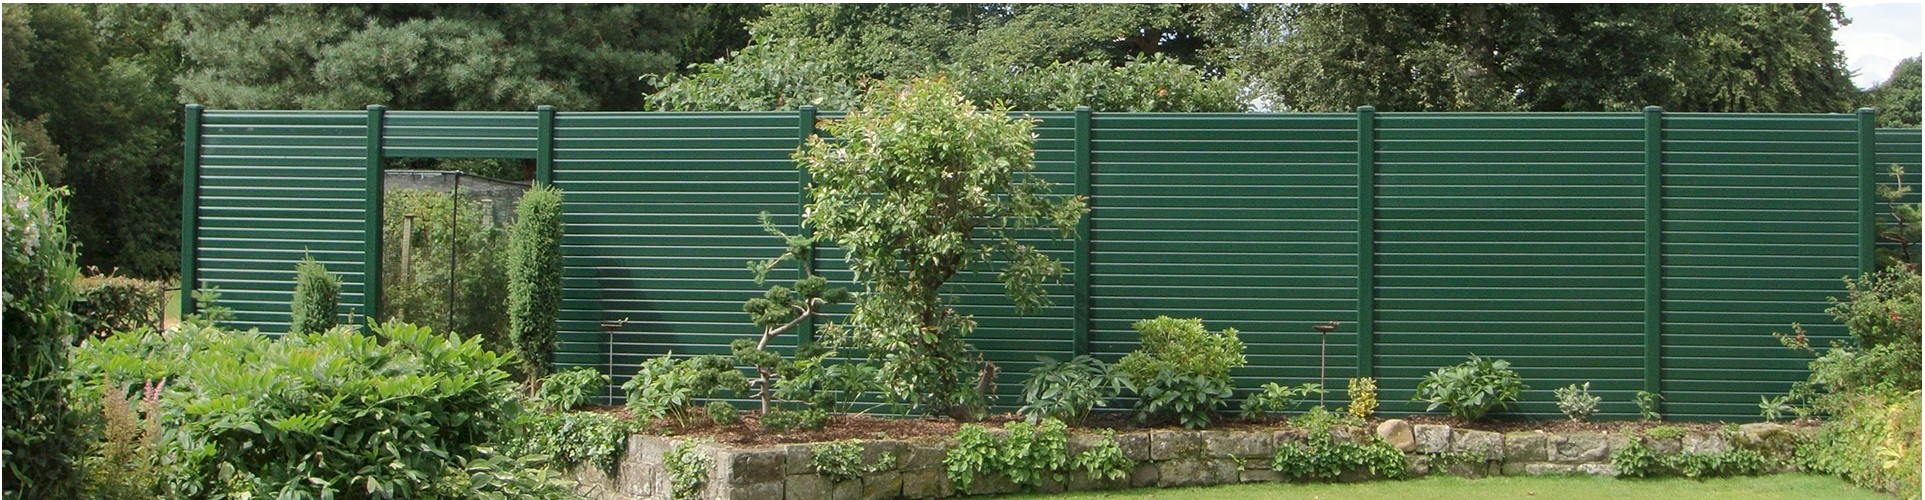 Suppliers of Plastic Garden Fencing Order Online at